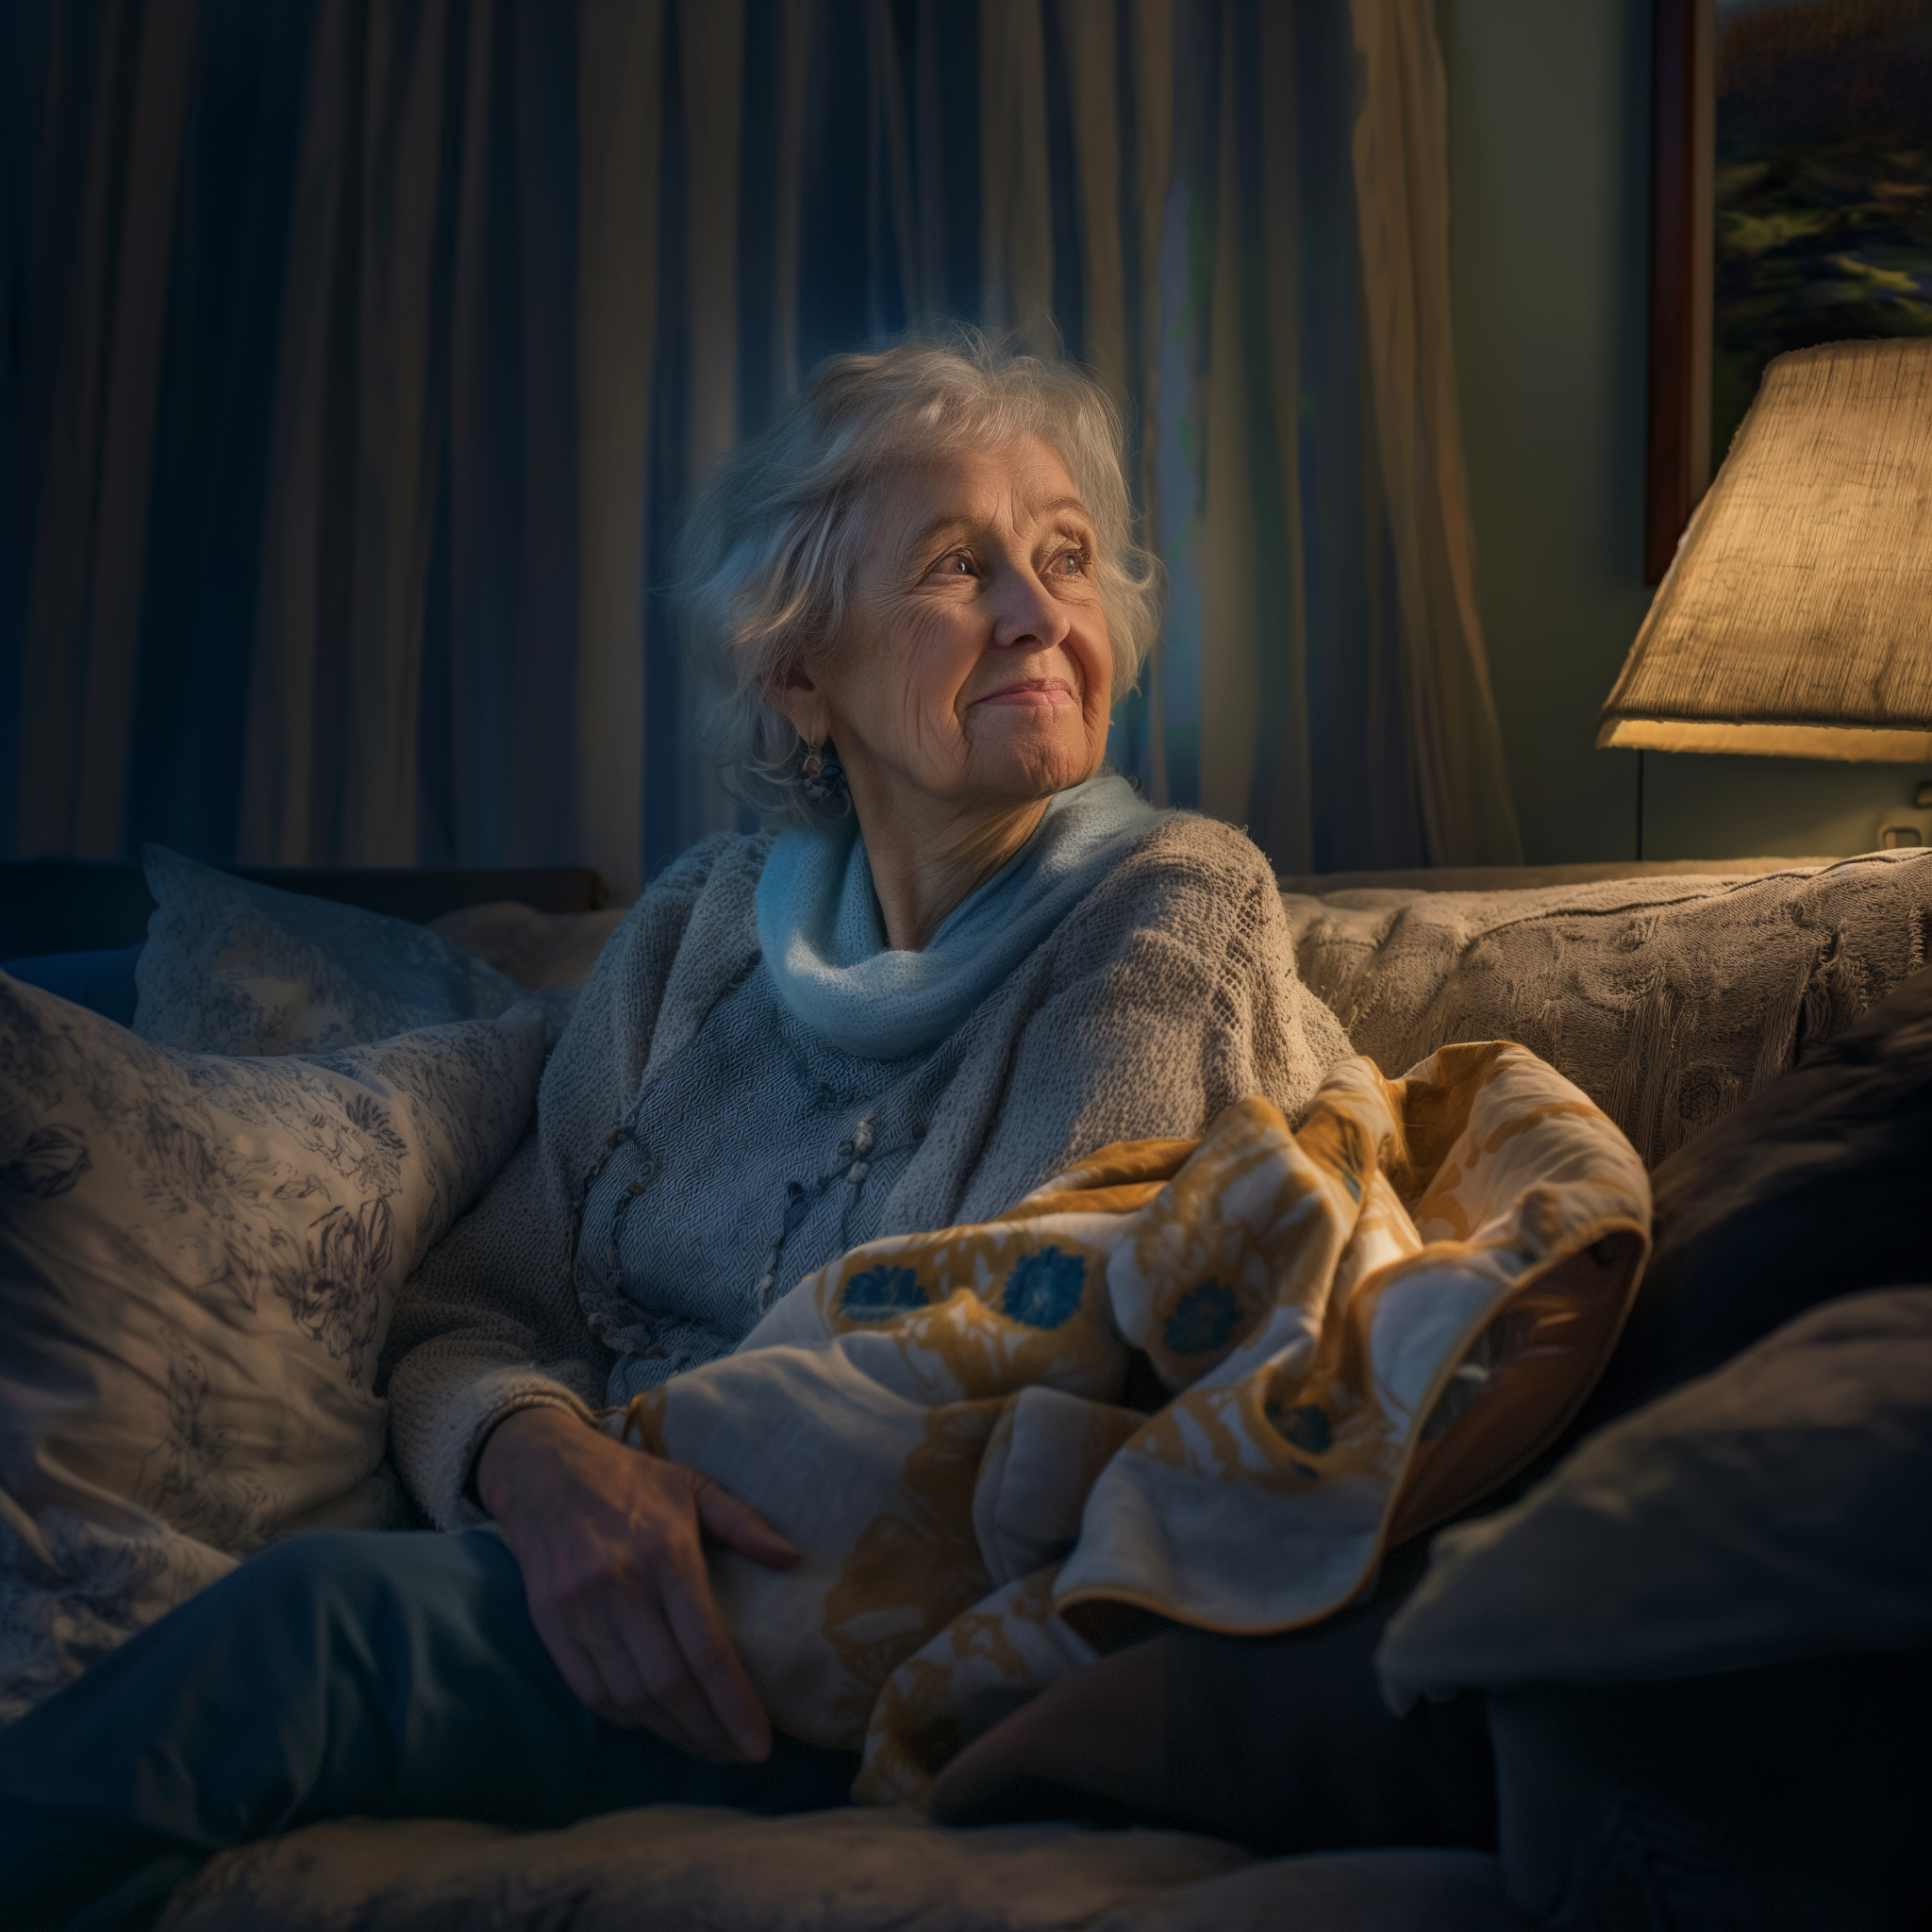 A grandma smiles while sitting on a sofa at night | Source: Midjourney